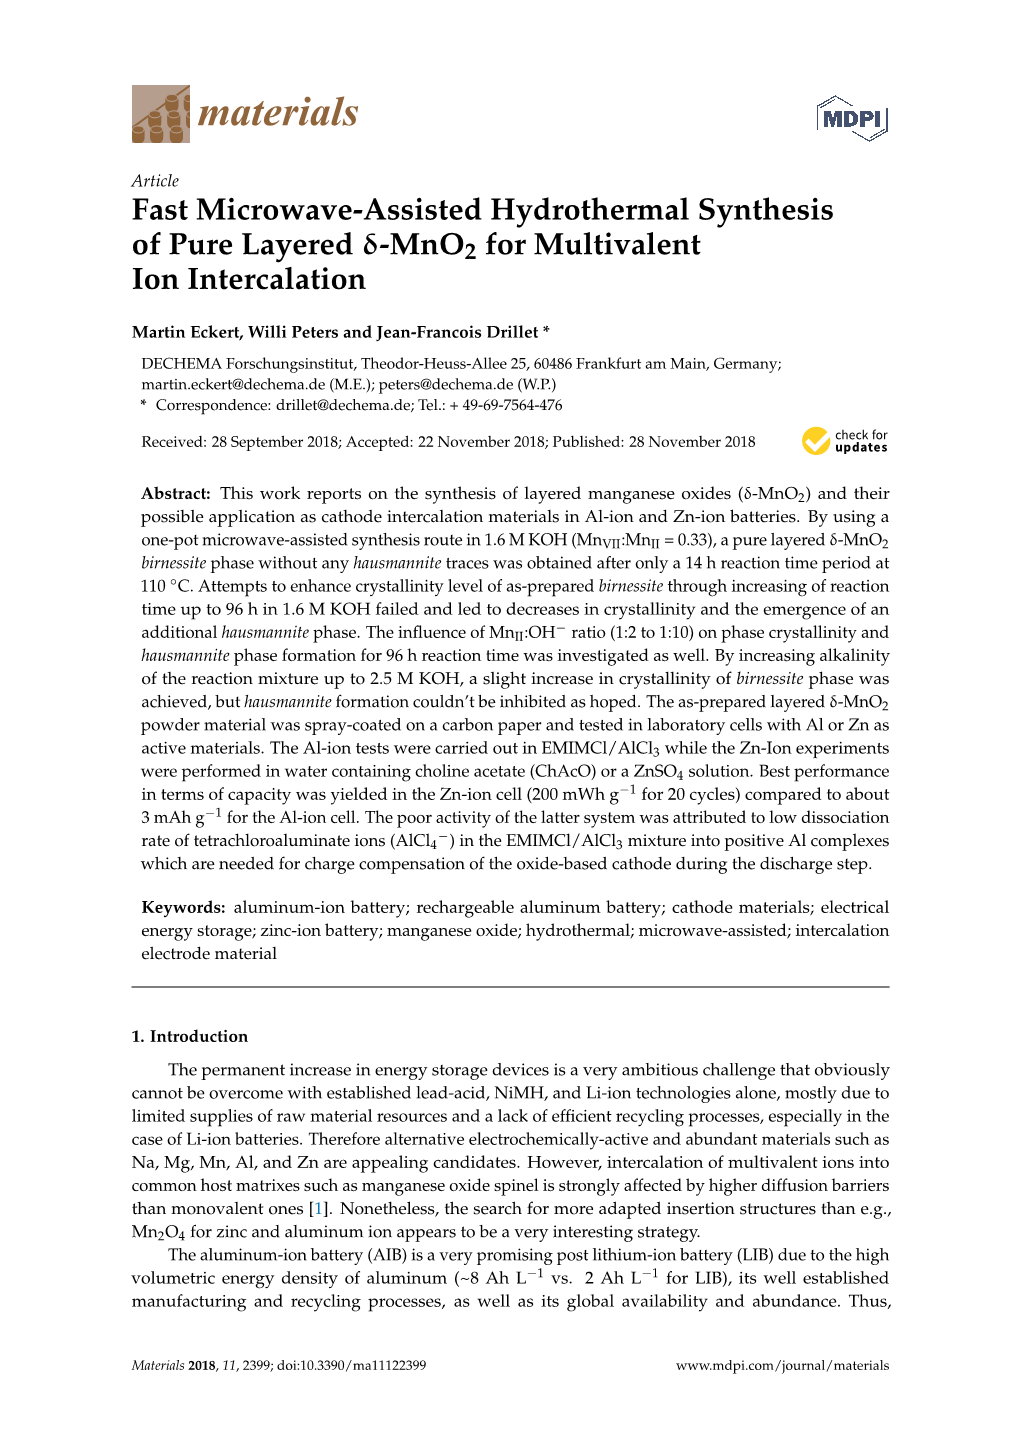 Fast Microwave-Assisted Hydrothermal Synthesis of Pure Layered Δ-Mno2 for Multivalent Ion Intercalation